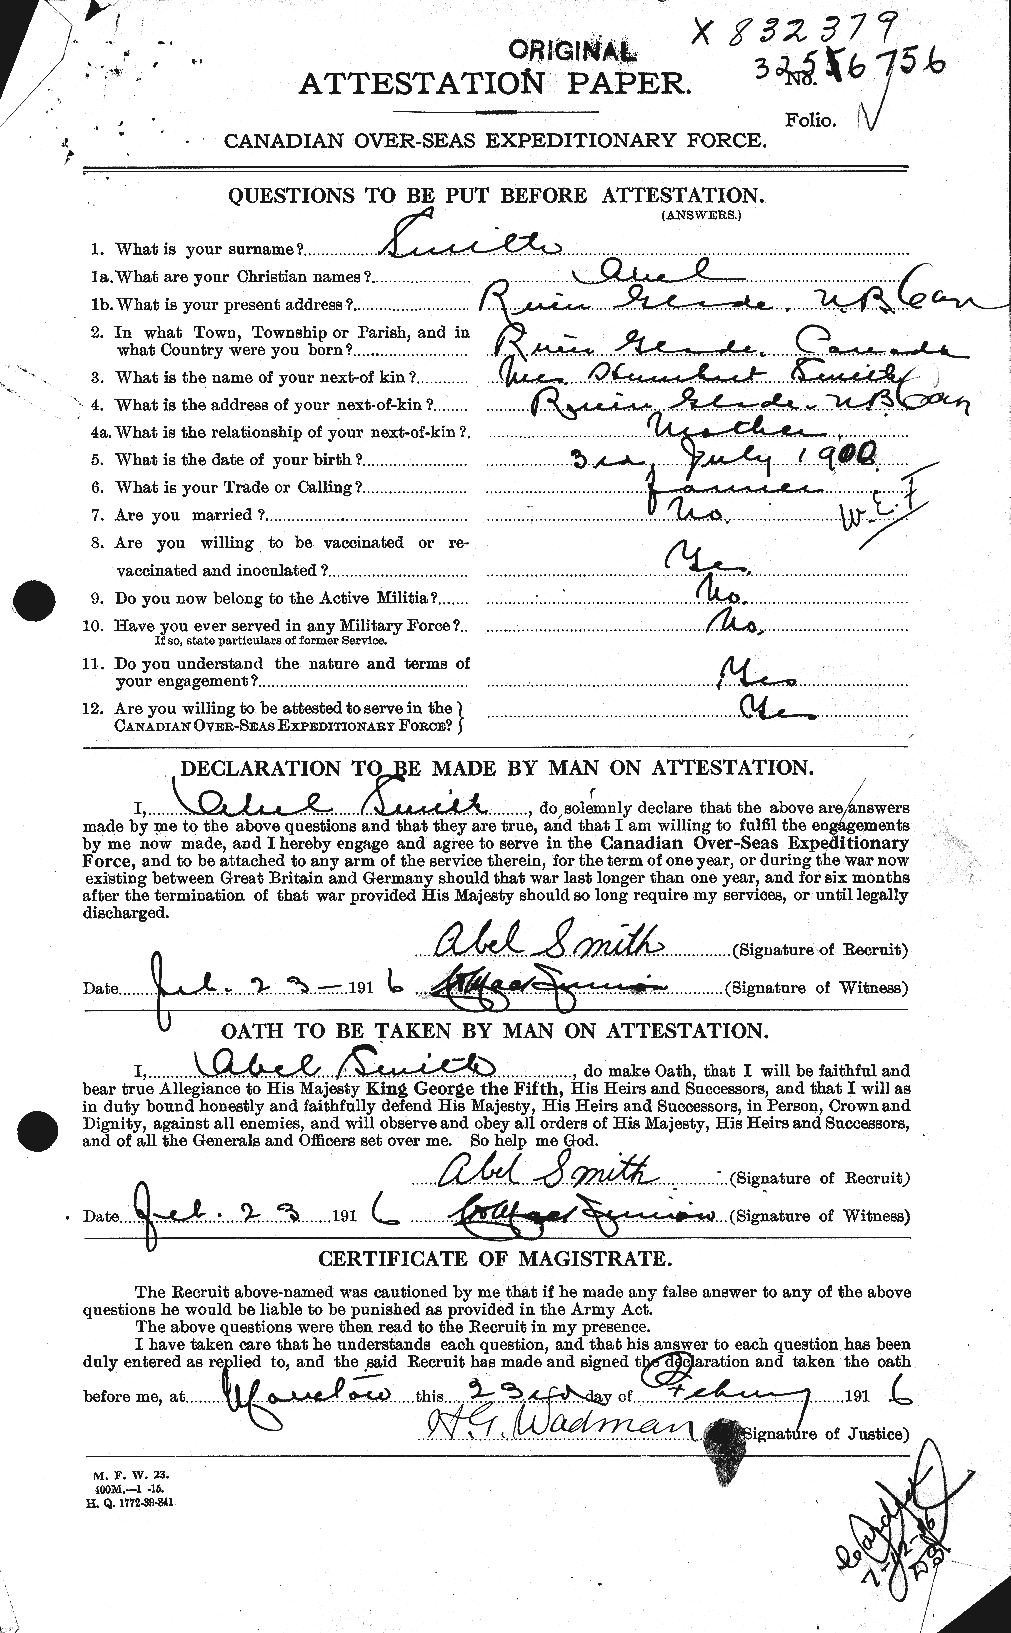 Personnel Records of the First World War - CEF 099478a